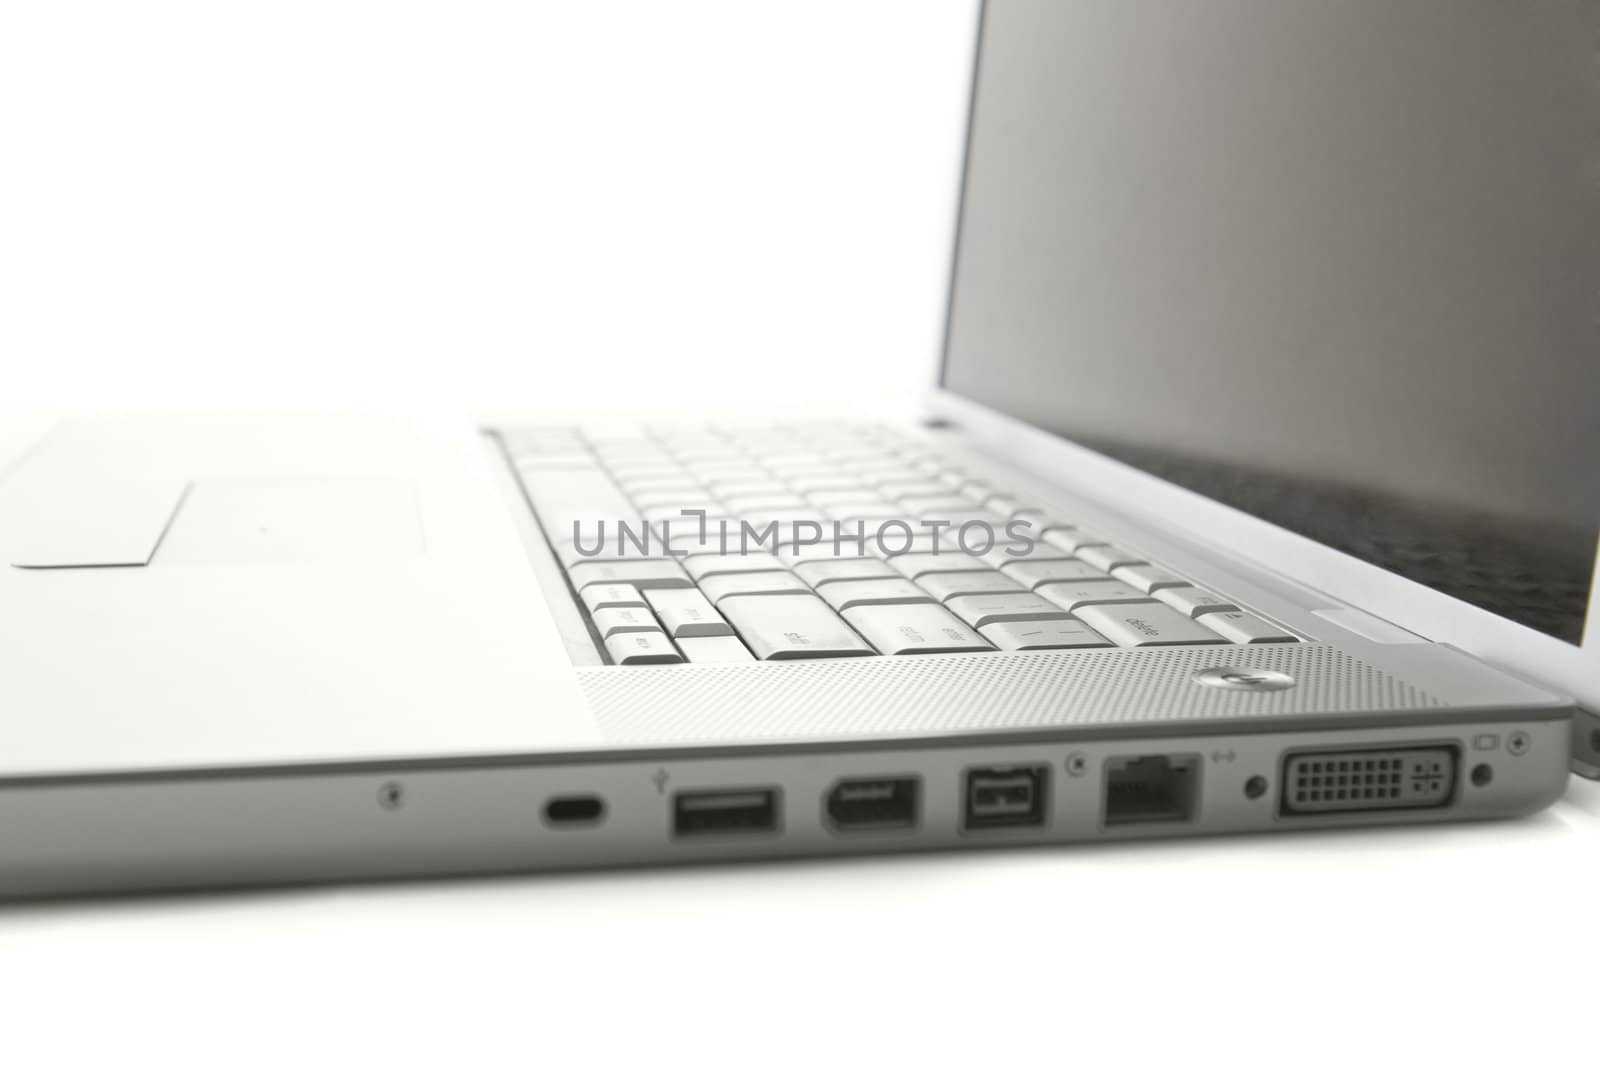 Closeup picture of a modern laptop computer.